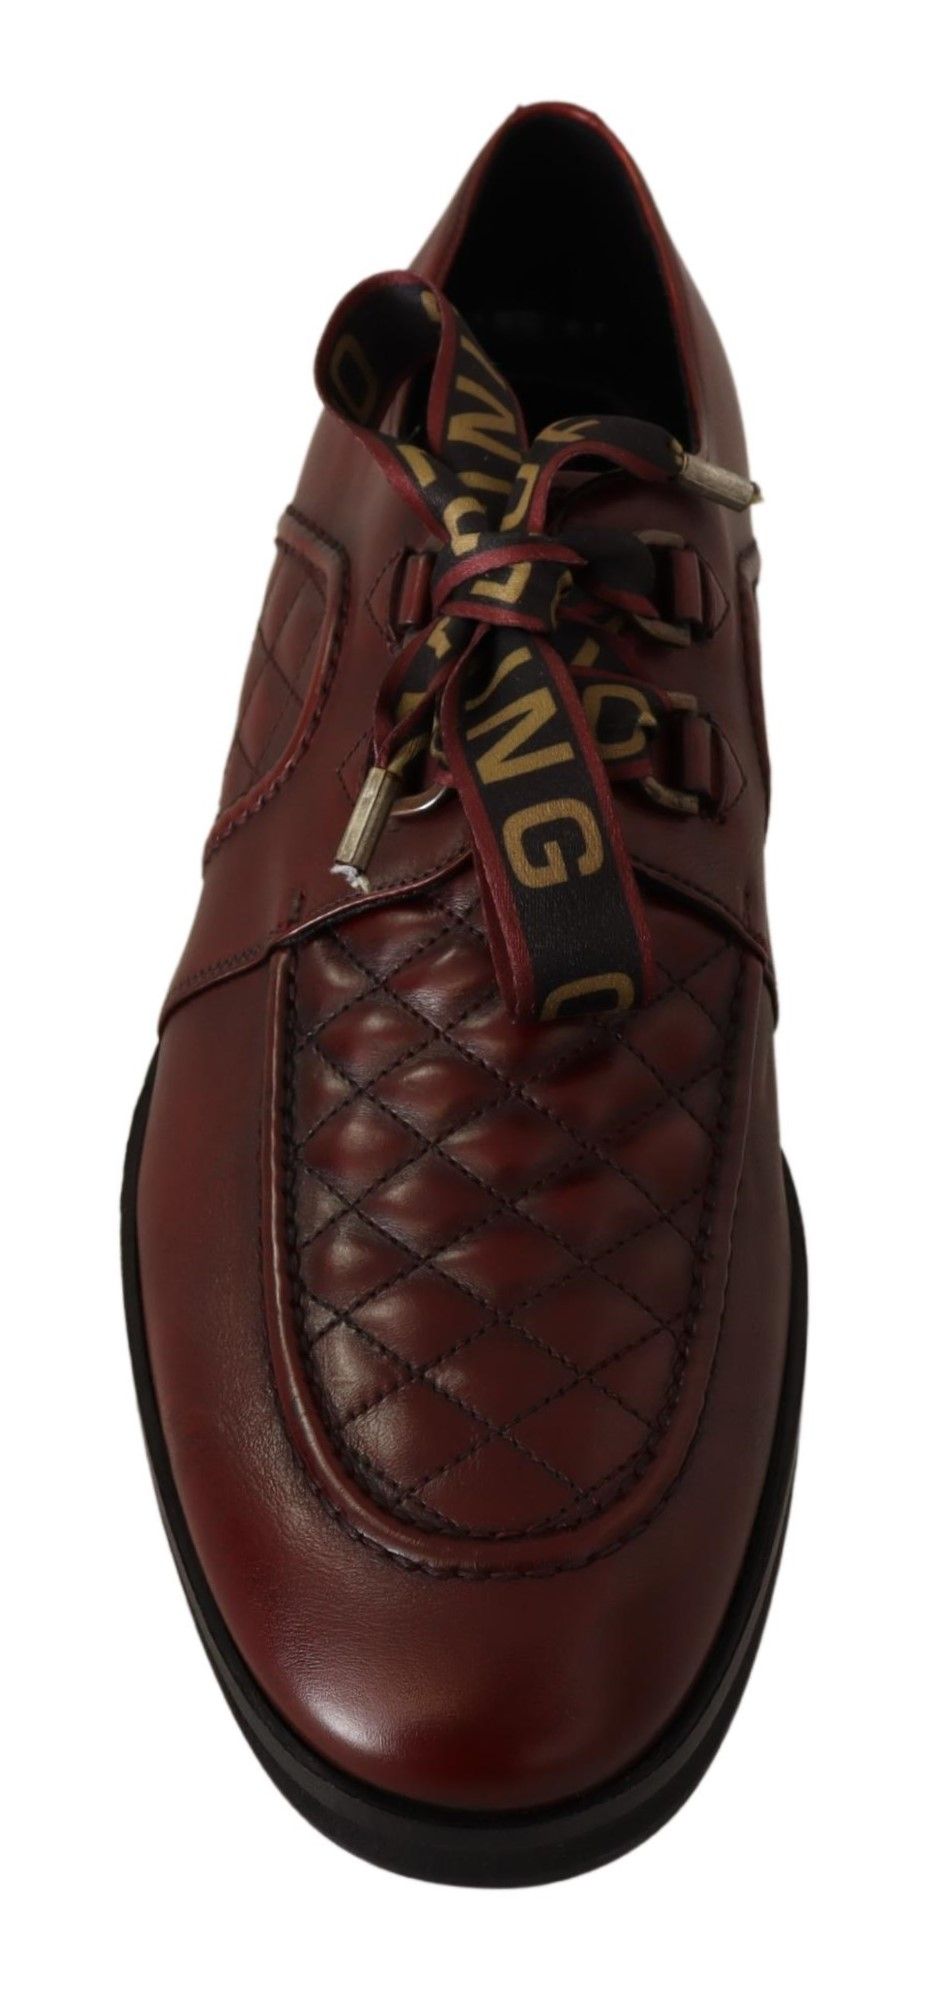 Dolce & Gabbana Red Leather Lace Up Dress Formal Shoes